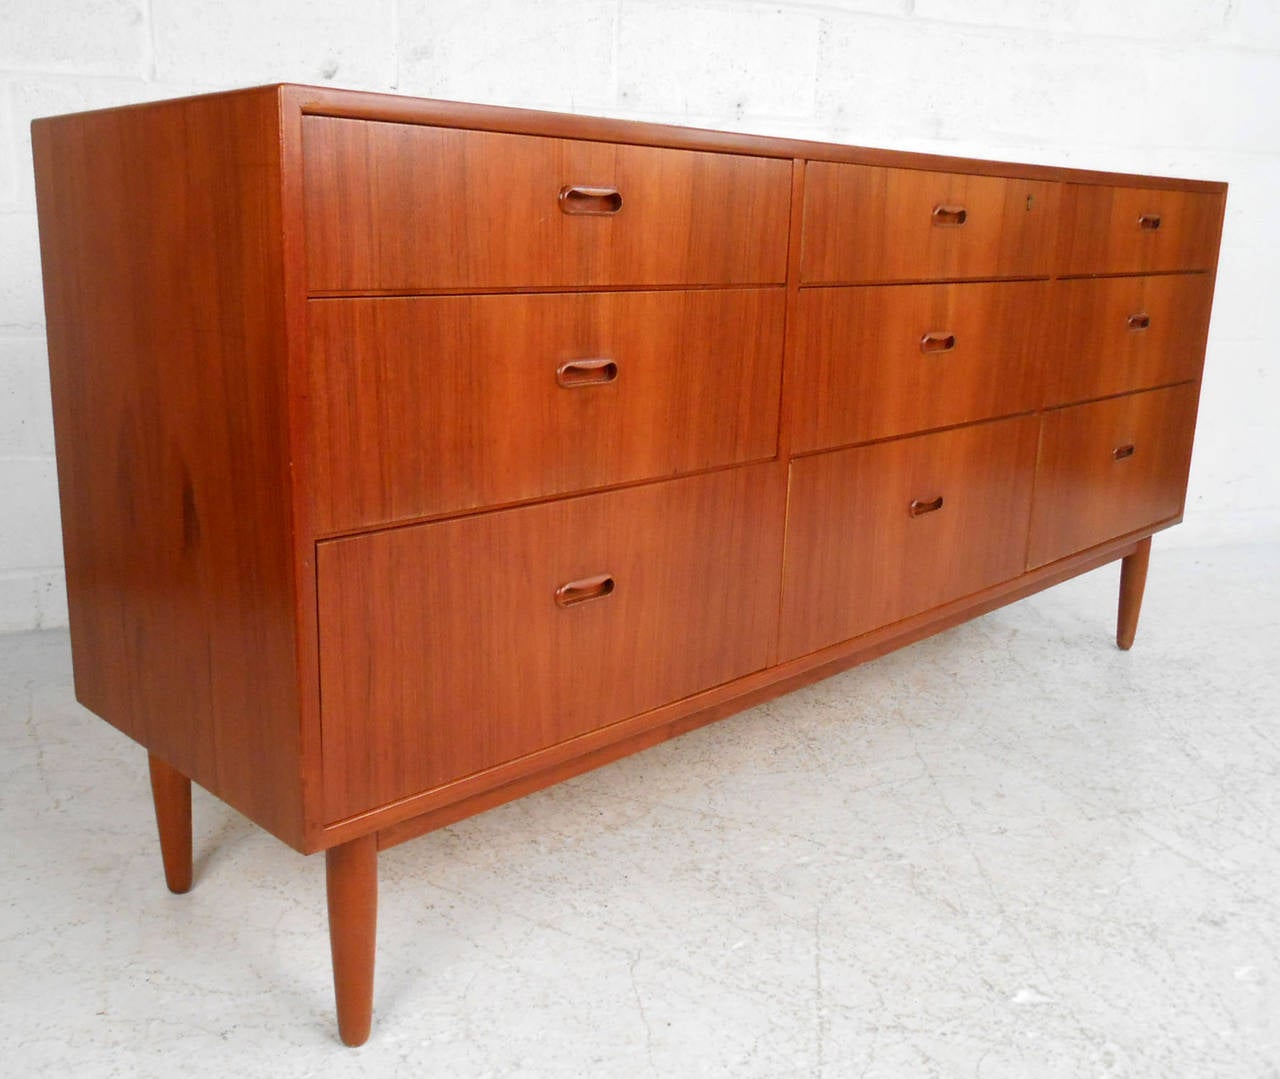 This beautiful Danish teak nine drawer dresser features unique drawer pulls, well-crafted dovetailed drawers, tapered legs, and an exquisite mid-century teak finish. Please confirm item location (NY or NJ).